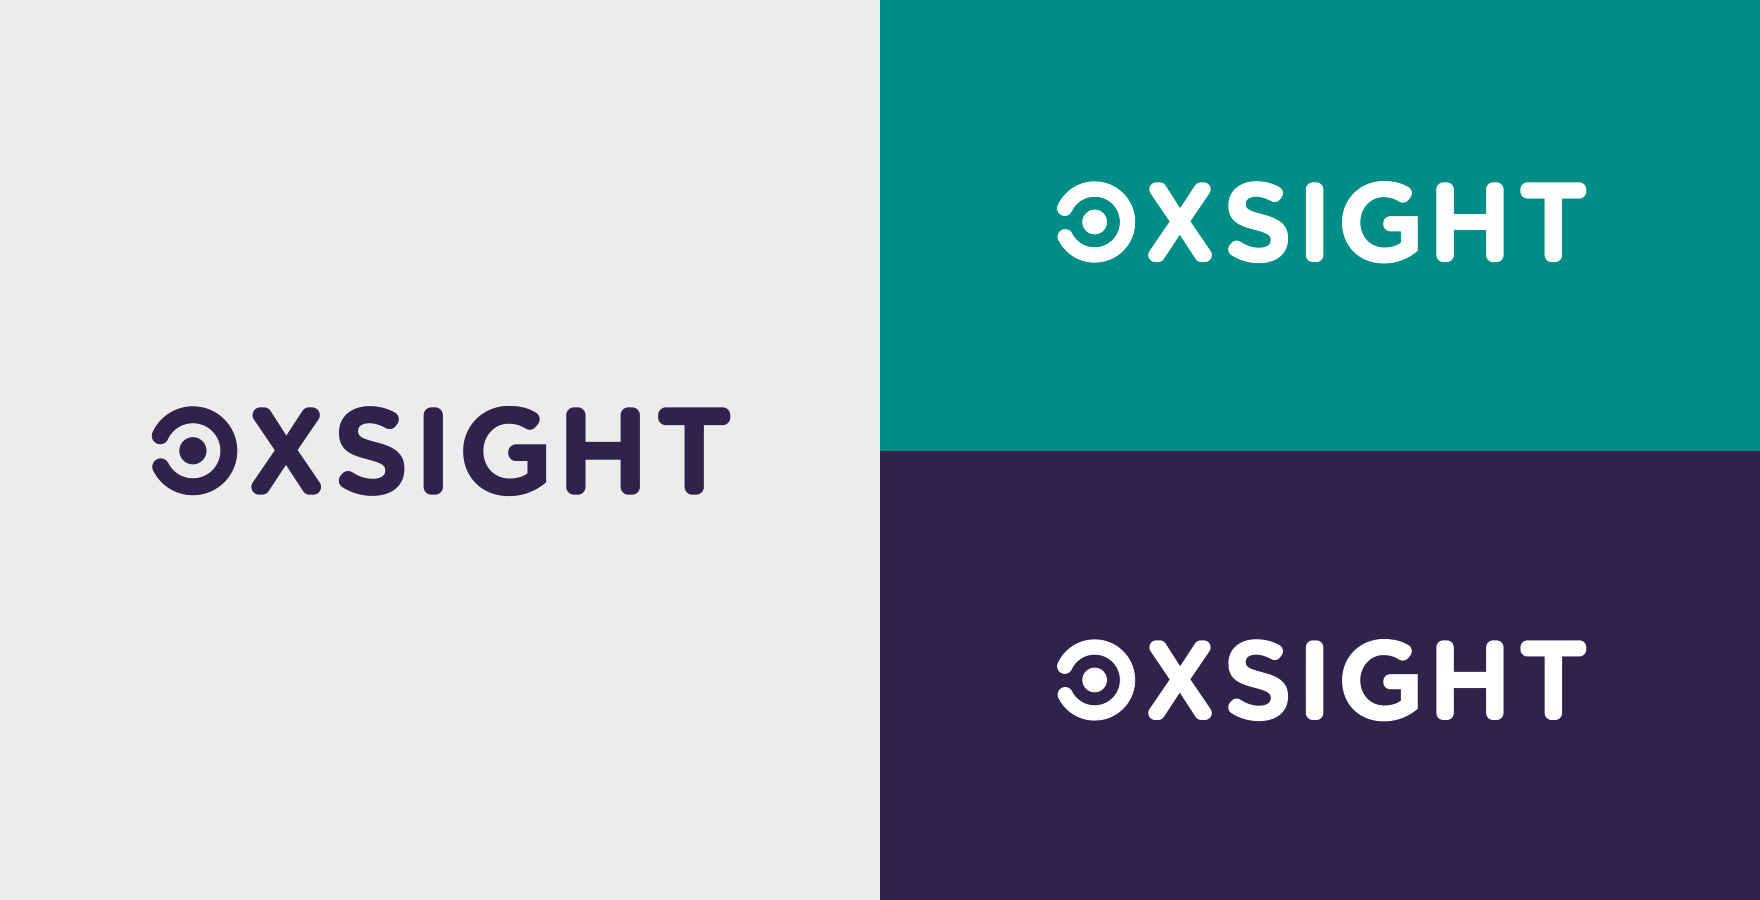 Oxsight-overview